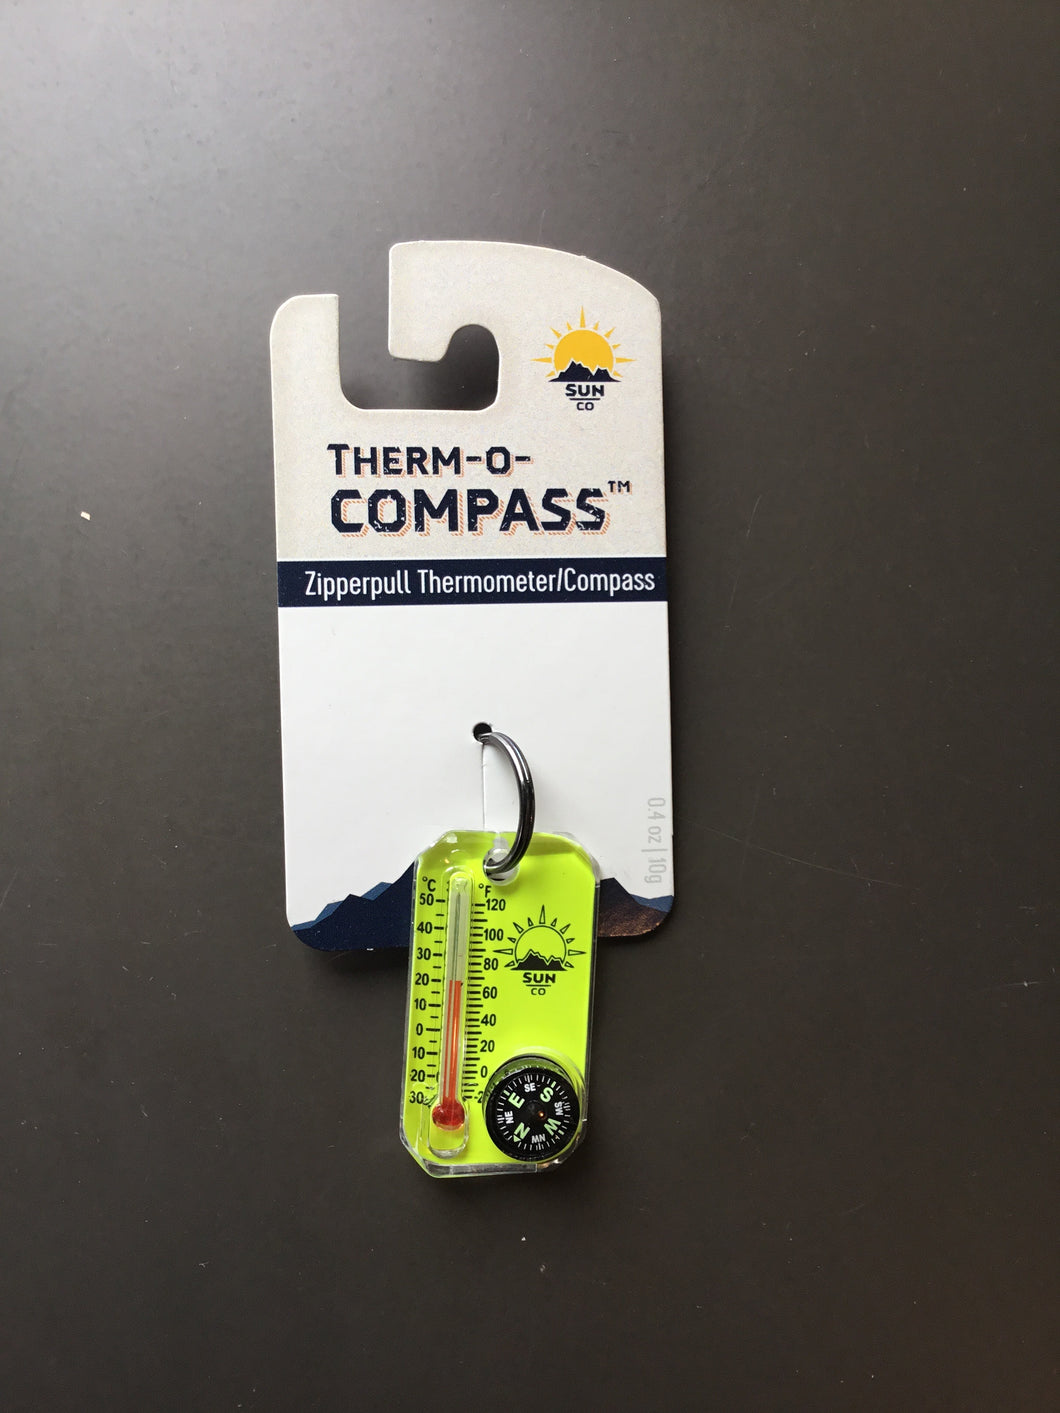 Therm-o compass zipper pull